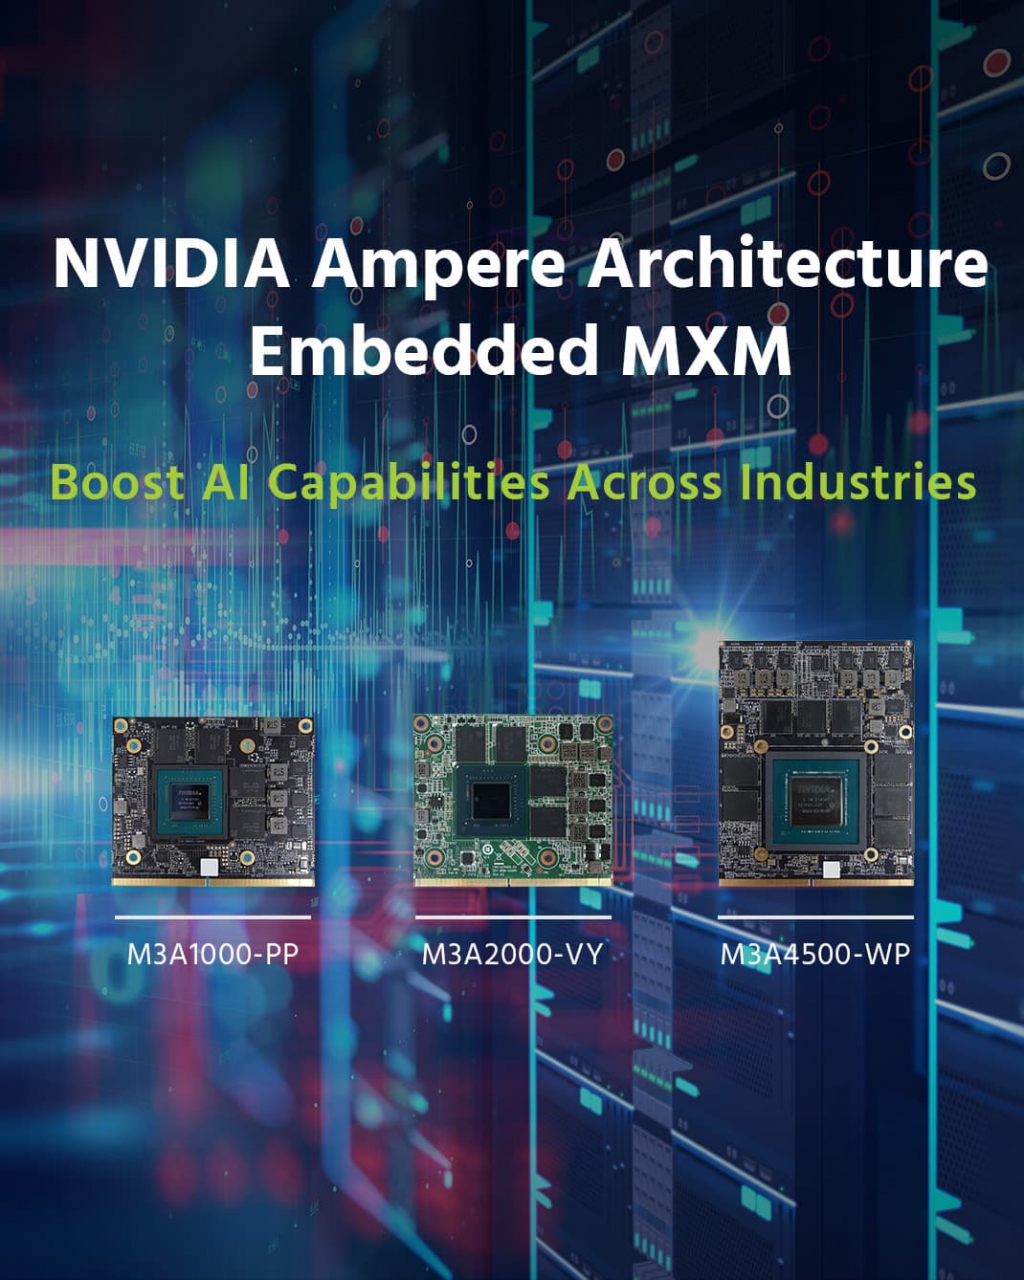 NVIDIA Ampere Architecture Embedded MXM